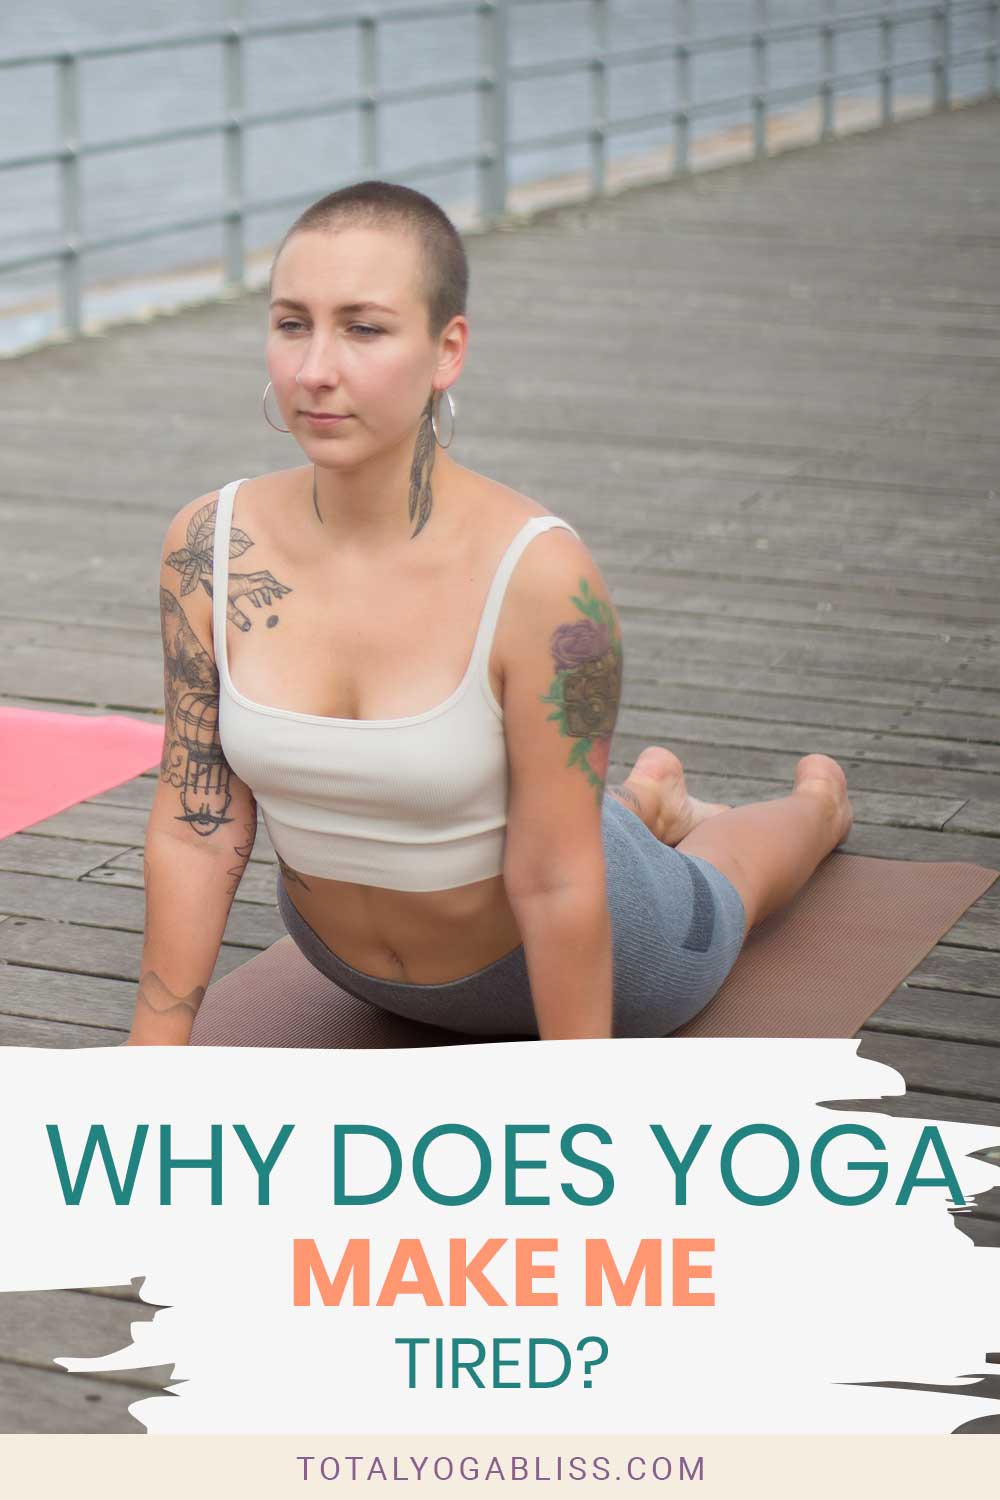 Woman with very short hair in white tank tops doing yoga - Why Does Yoga Make Me Tired?